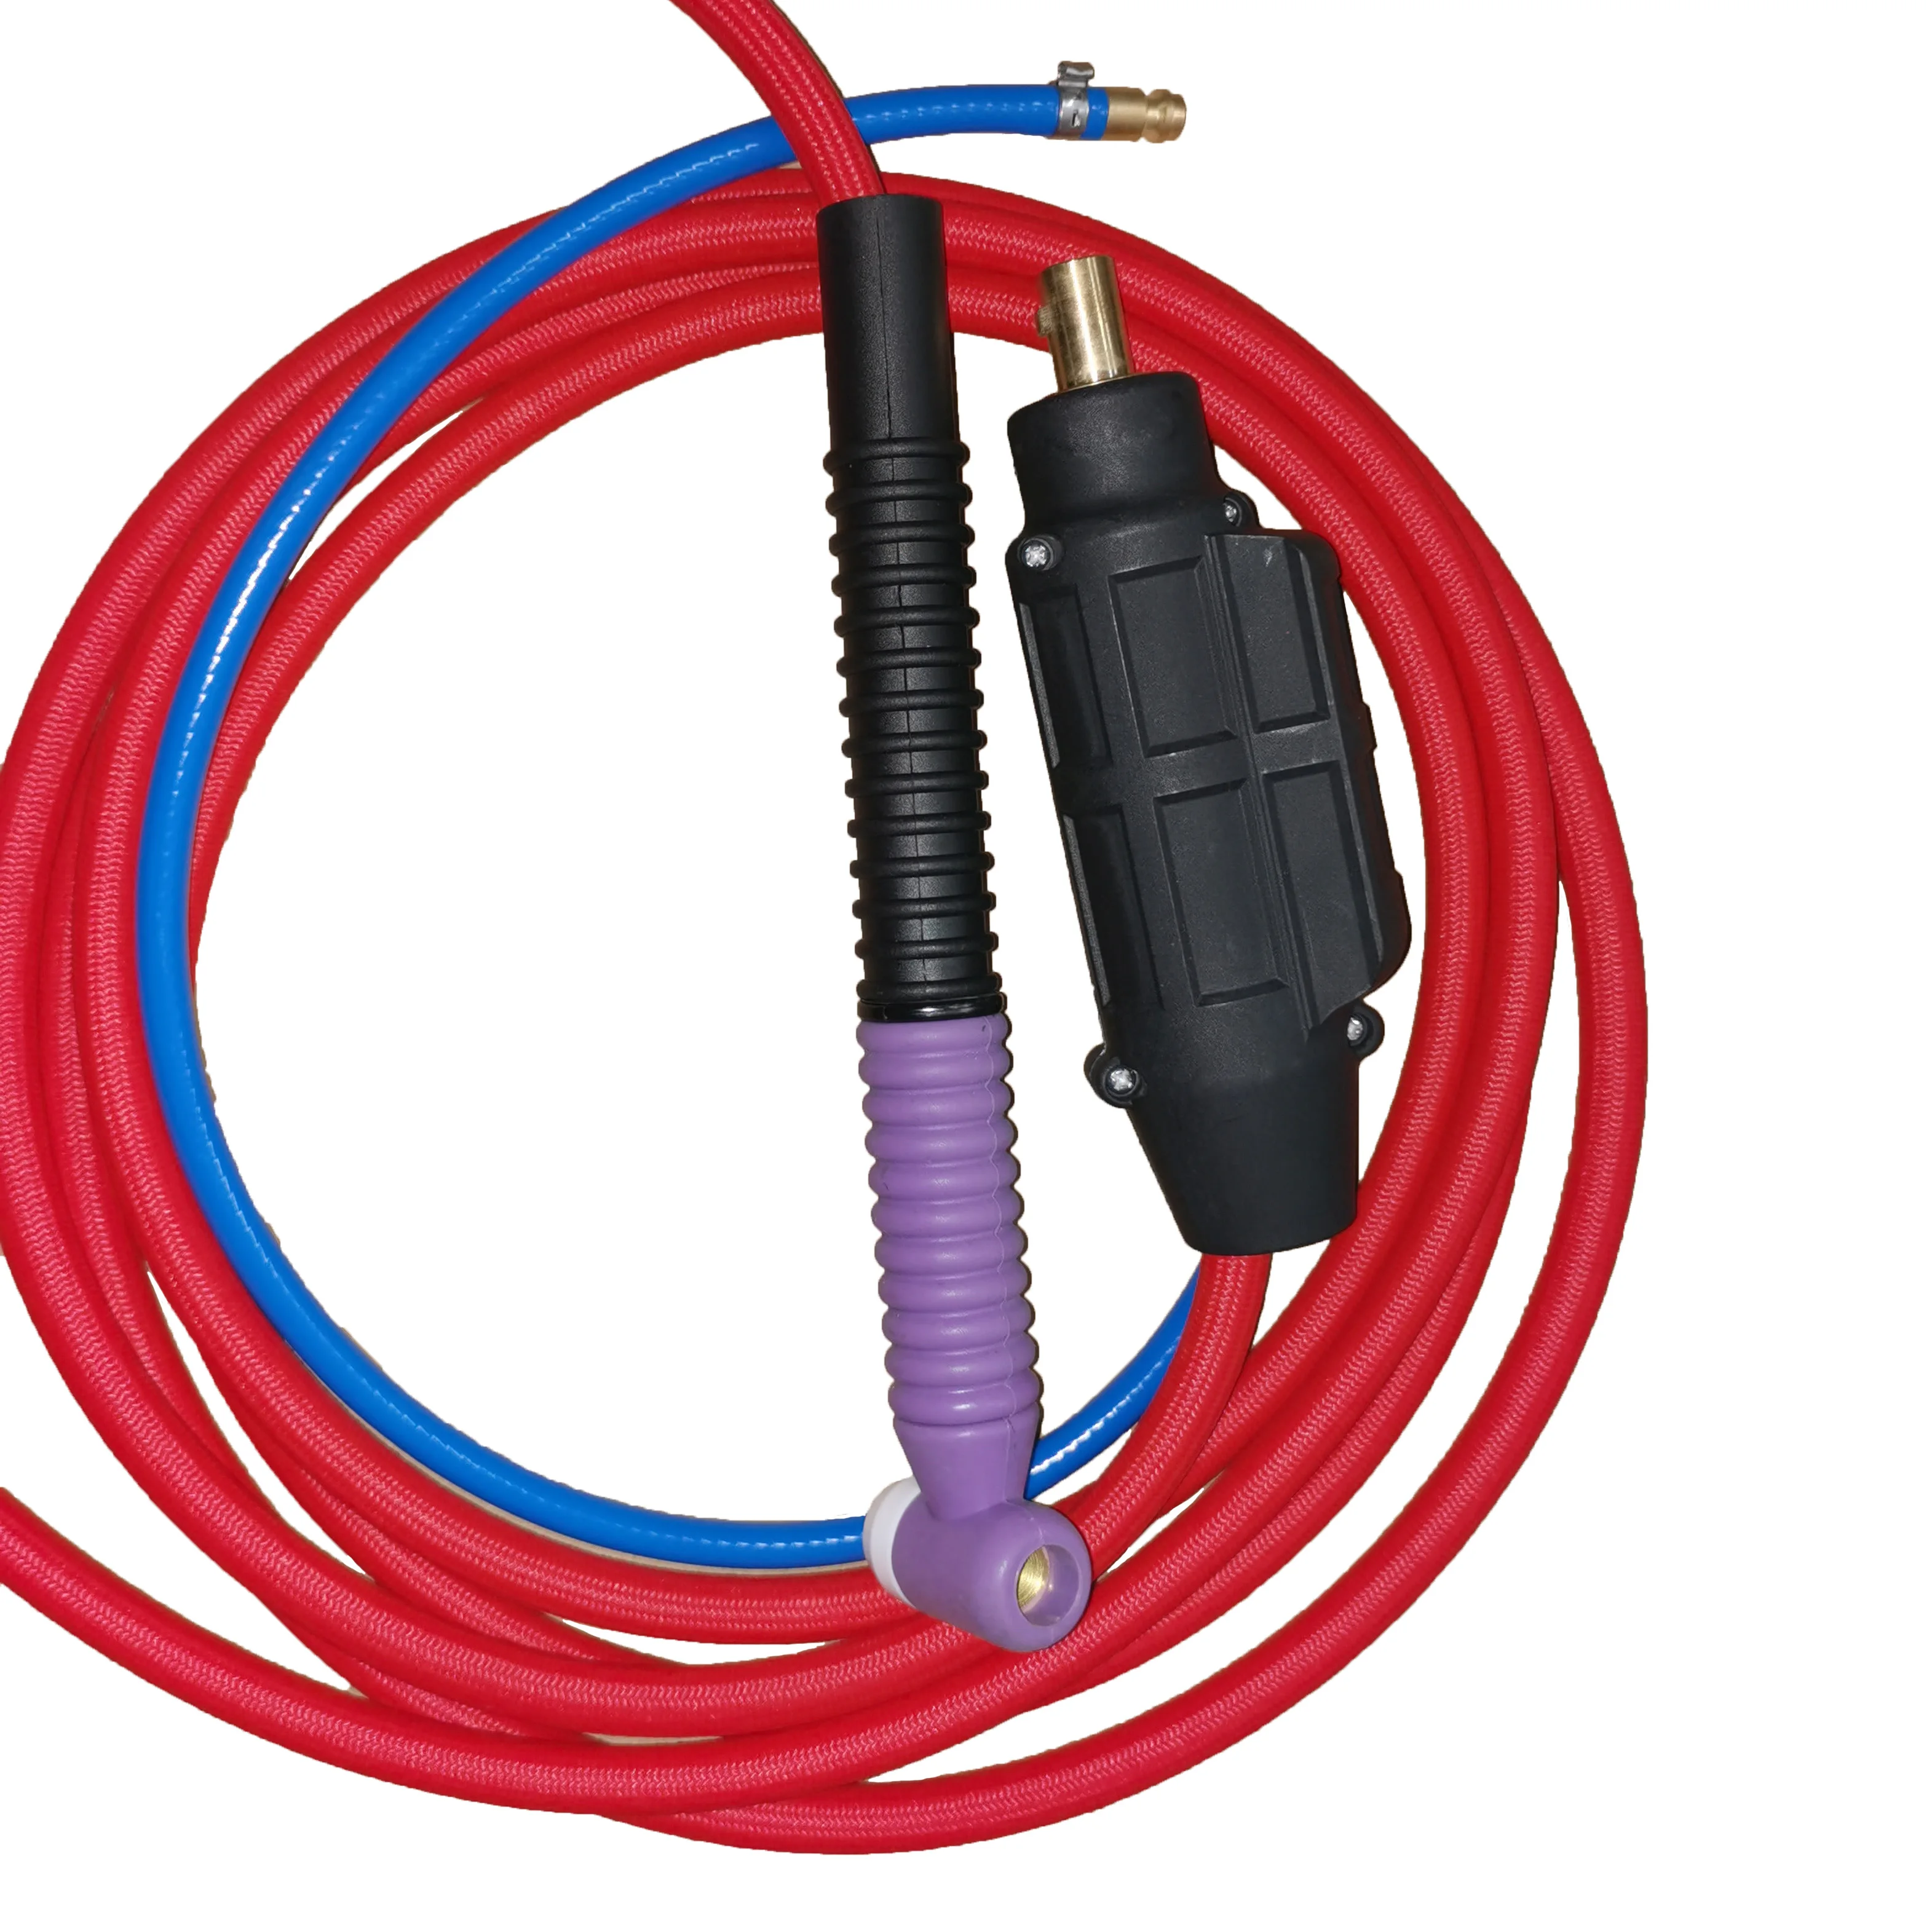 4M WP-17Tig Welding Gun WIth Flex Body 90 Degrees Neck Head Red Soft Cable 35-70 Euro Connector